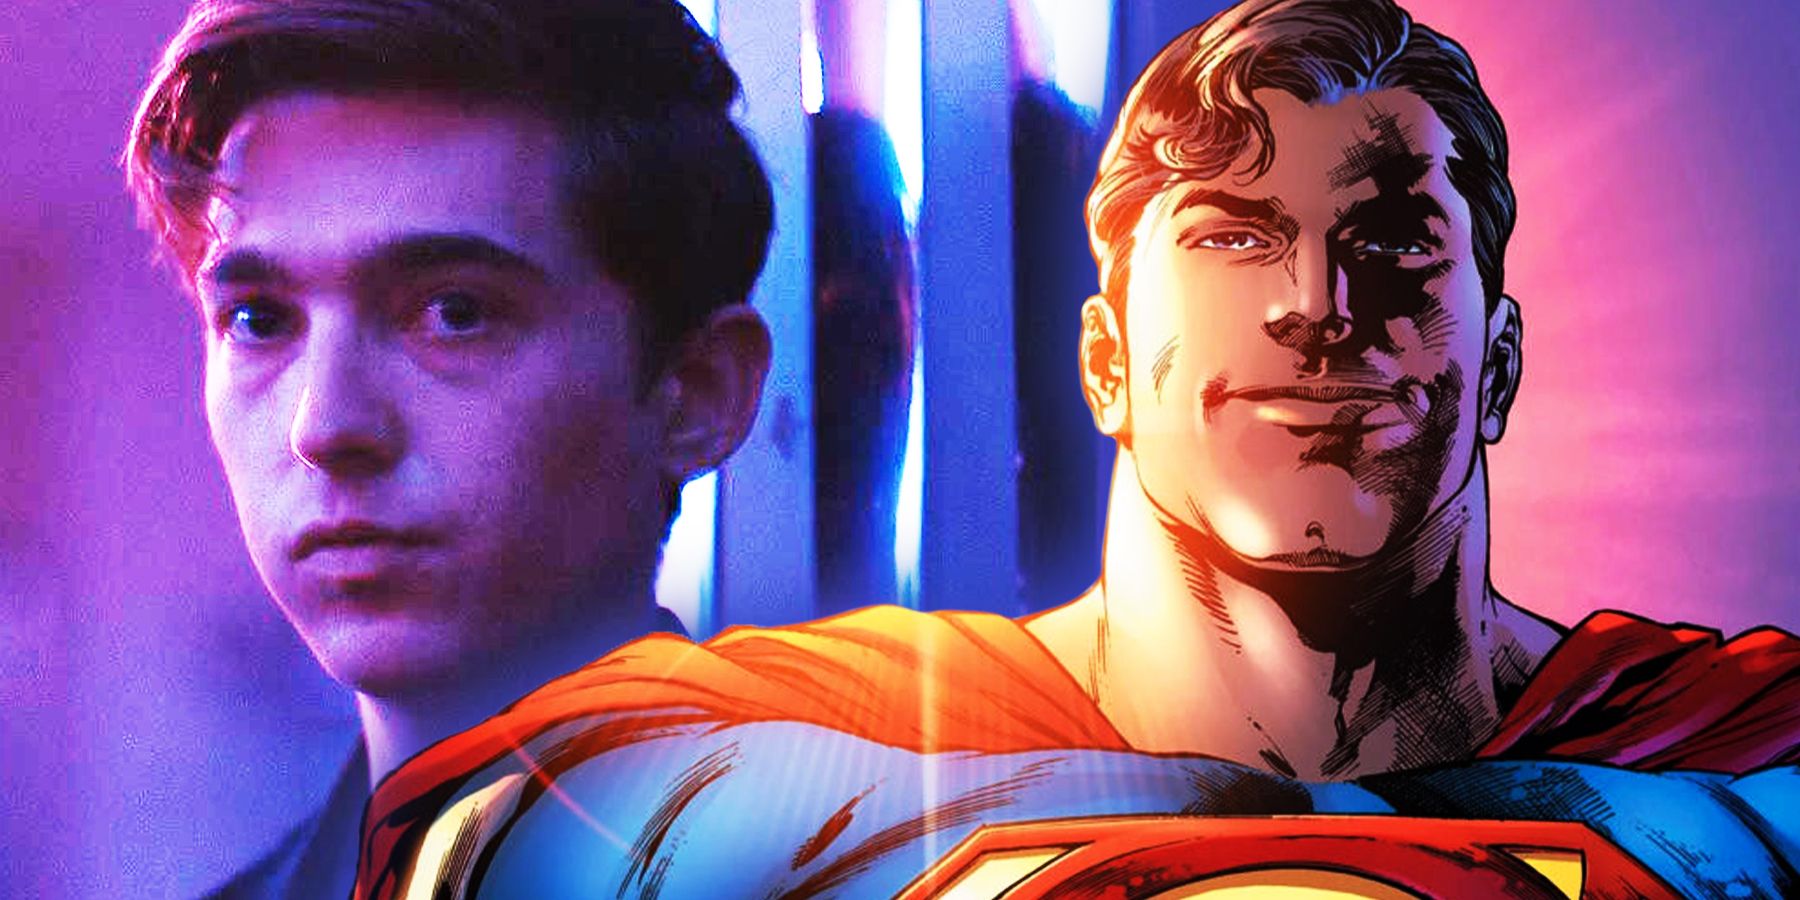 Jacob Elordi Isn't Right for the DCU's New Superman - But Another Euphoria Actor Is